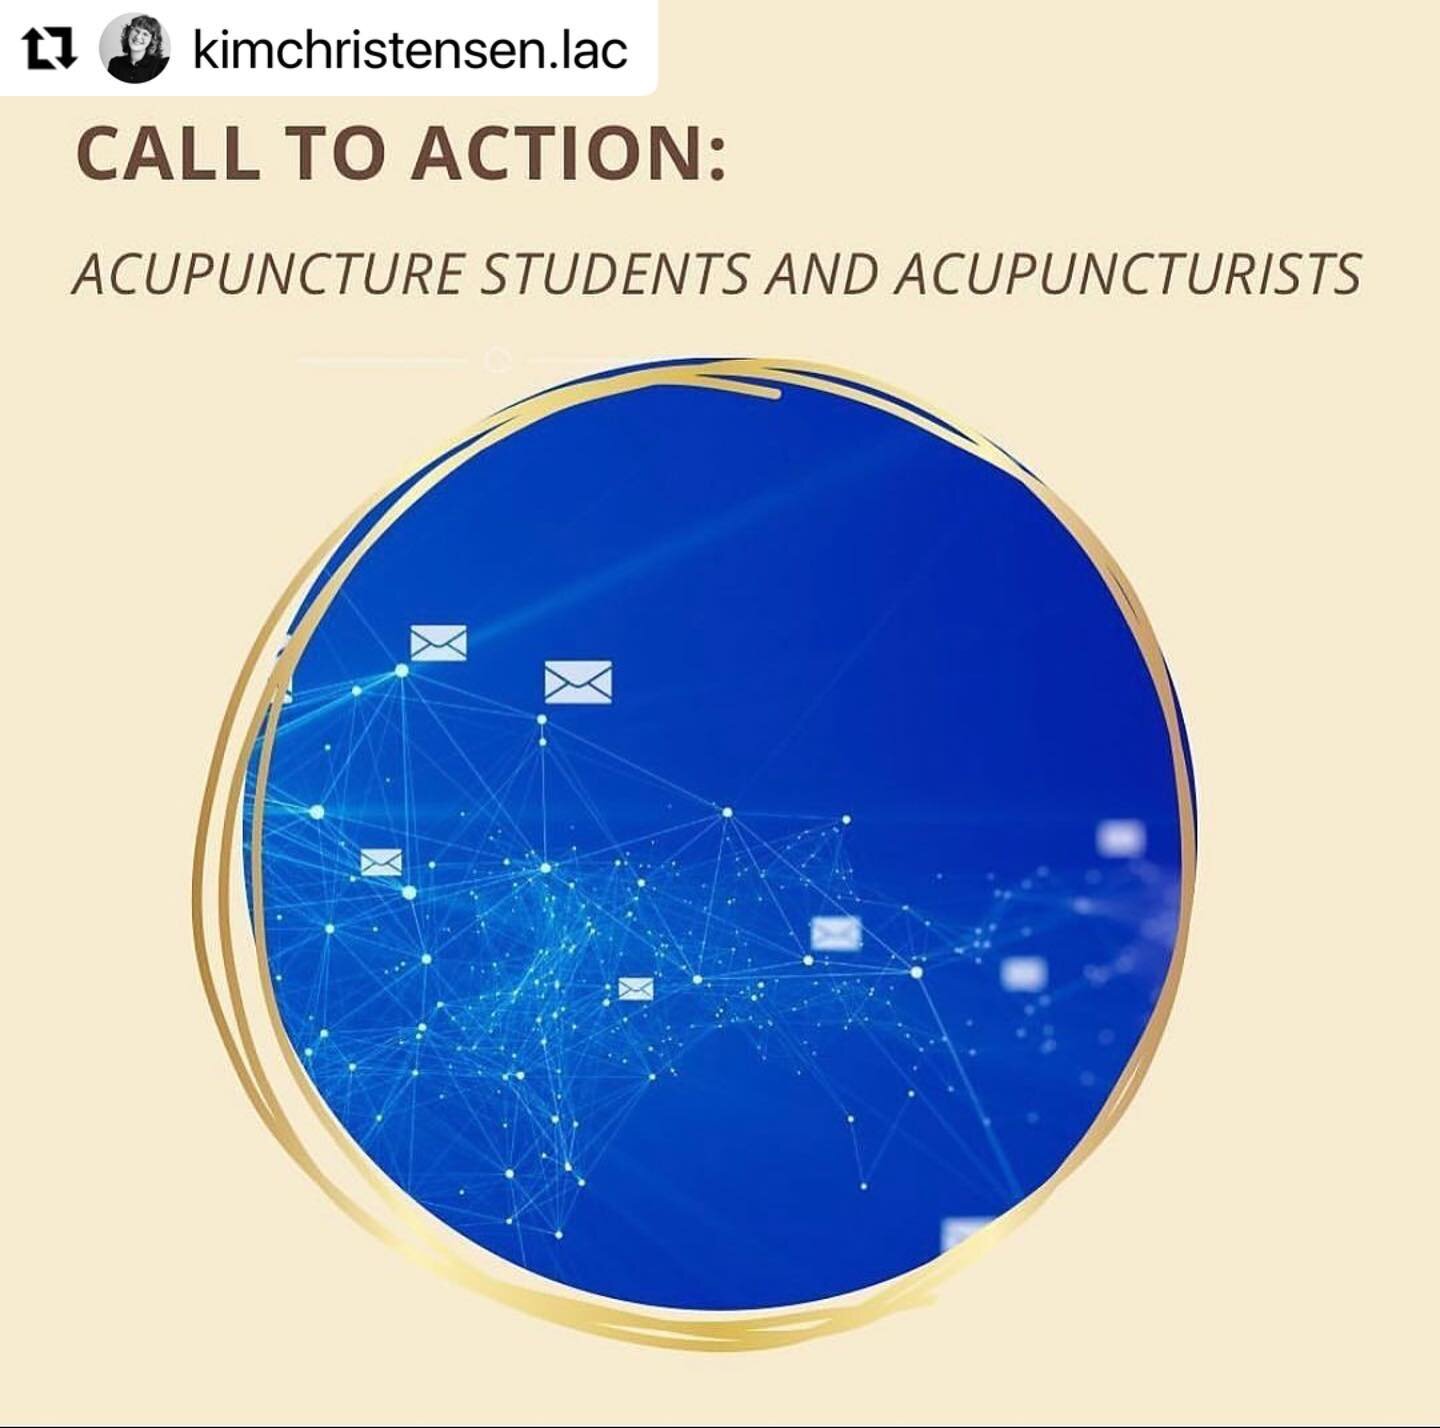 Call to Action for Acupuncture Students and Acupuncturists:

Please share widely!

TLDR; If you&rsquo;re unsure how to offer support beyond donating money to shooting victims funds, or you&rsquo;re new to activism and don&rsquo;t know where to start,